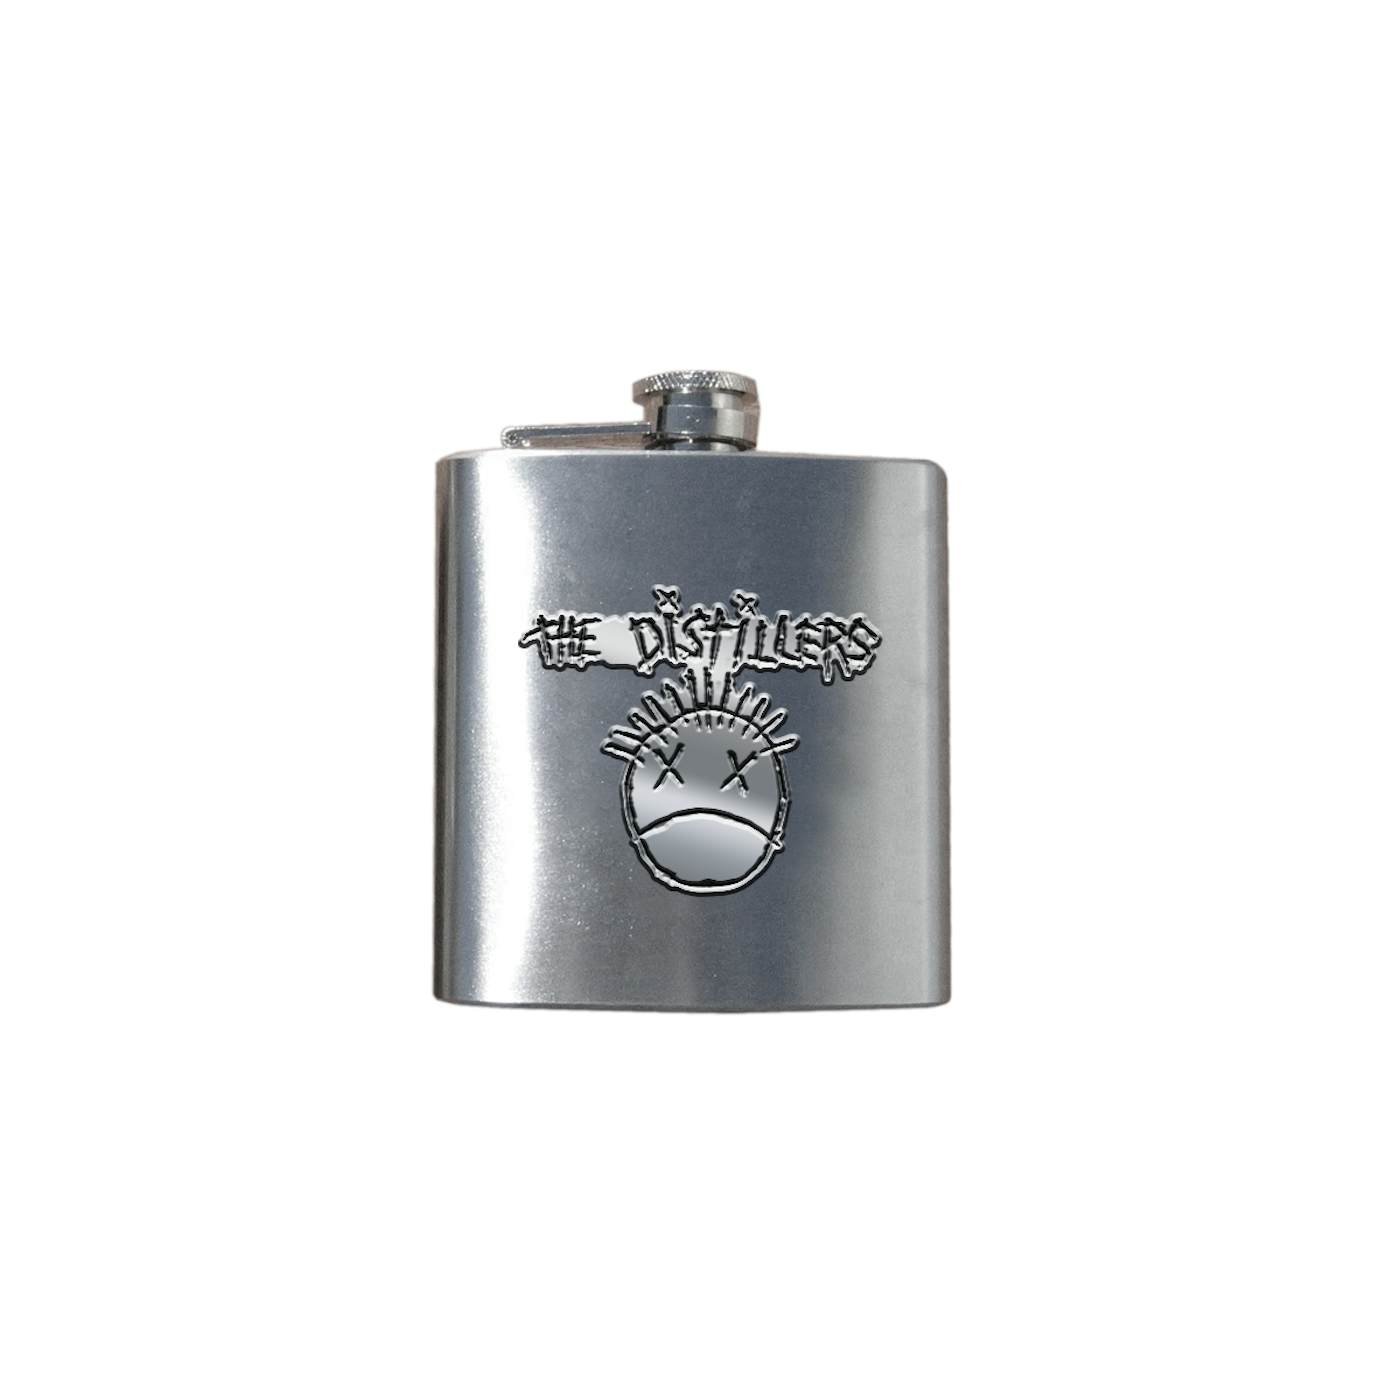 The Distillers Flask